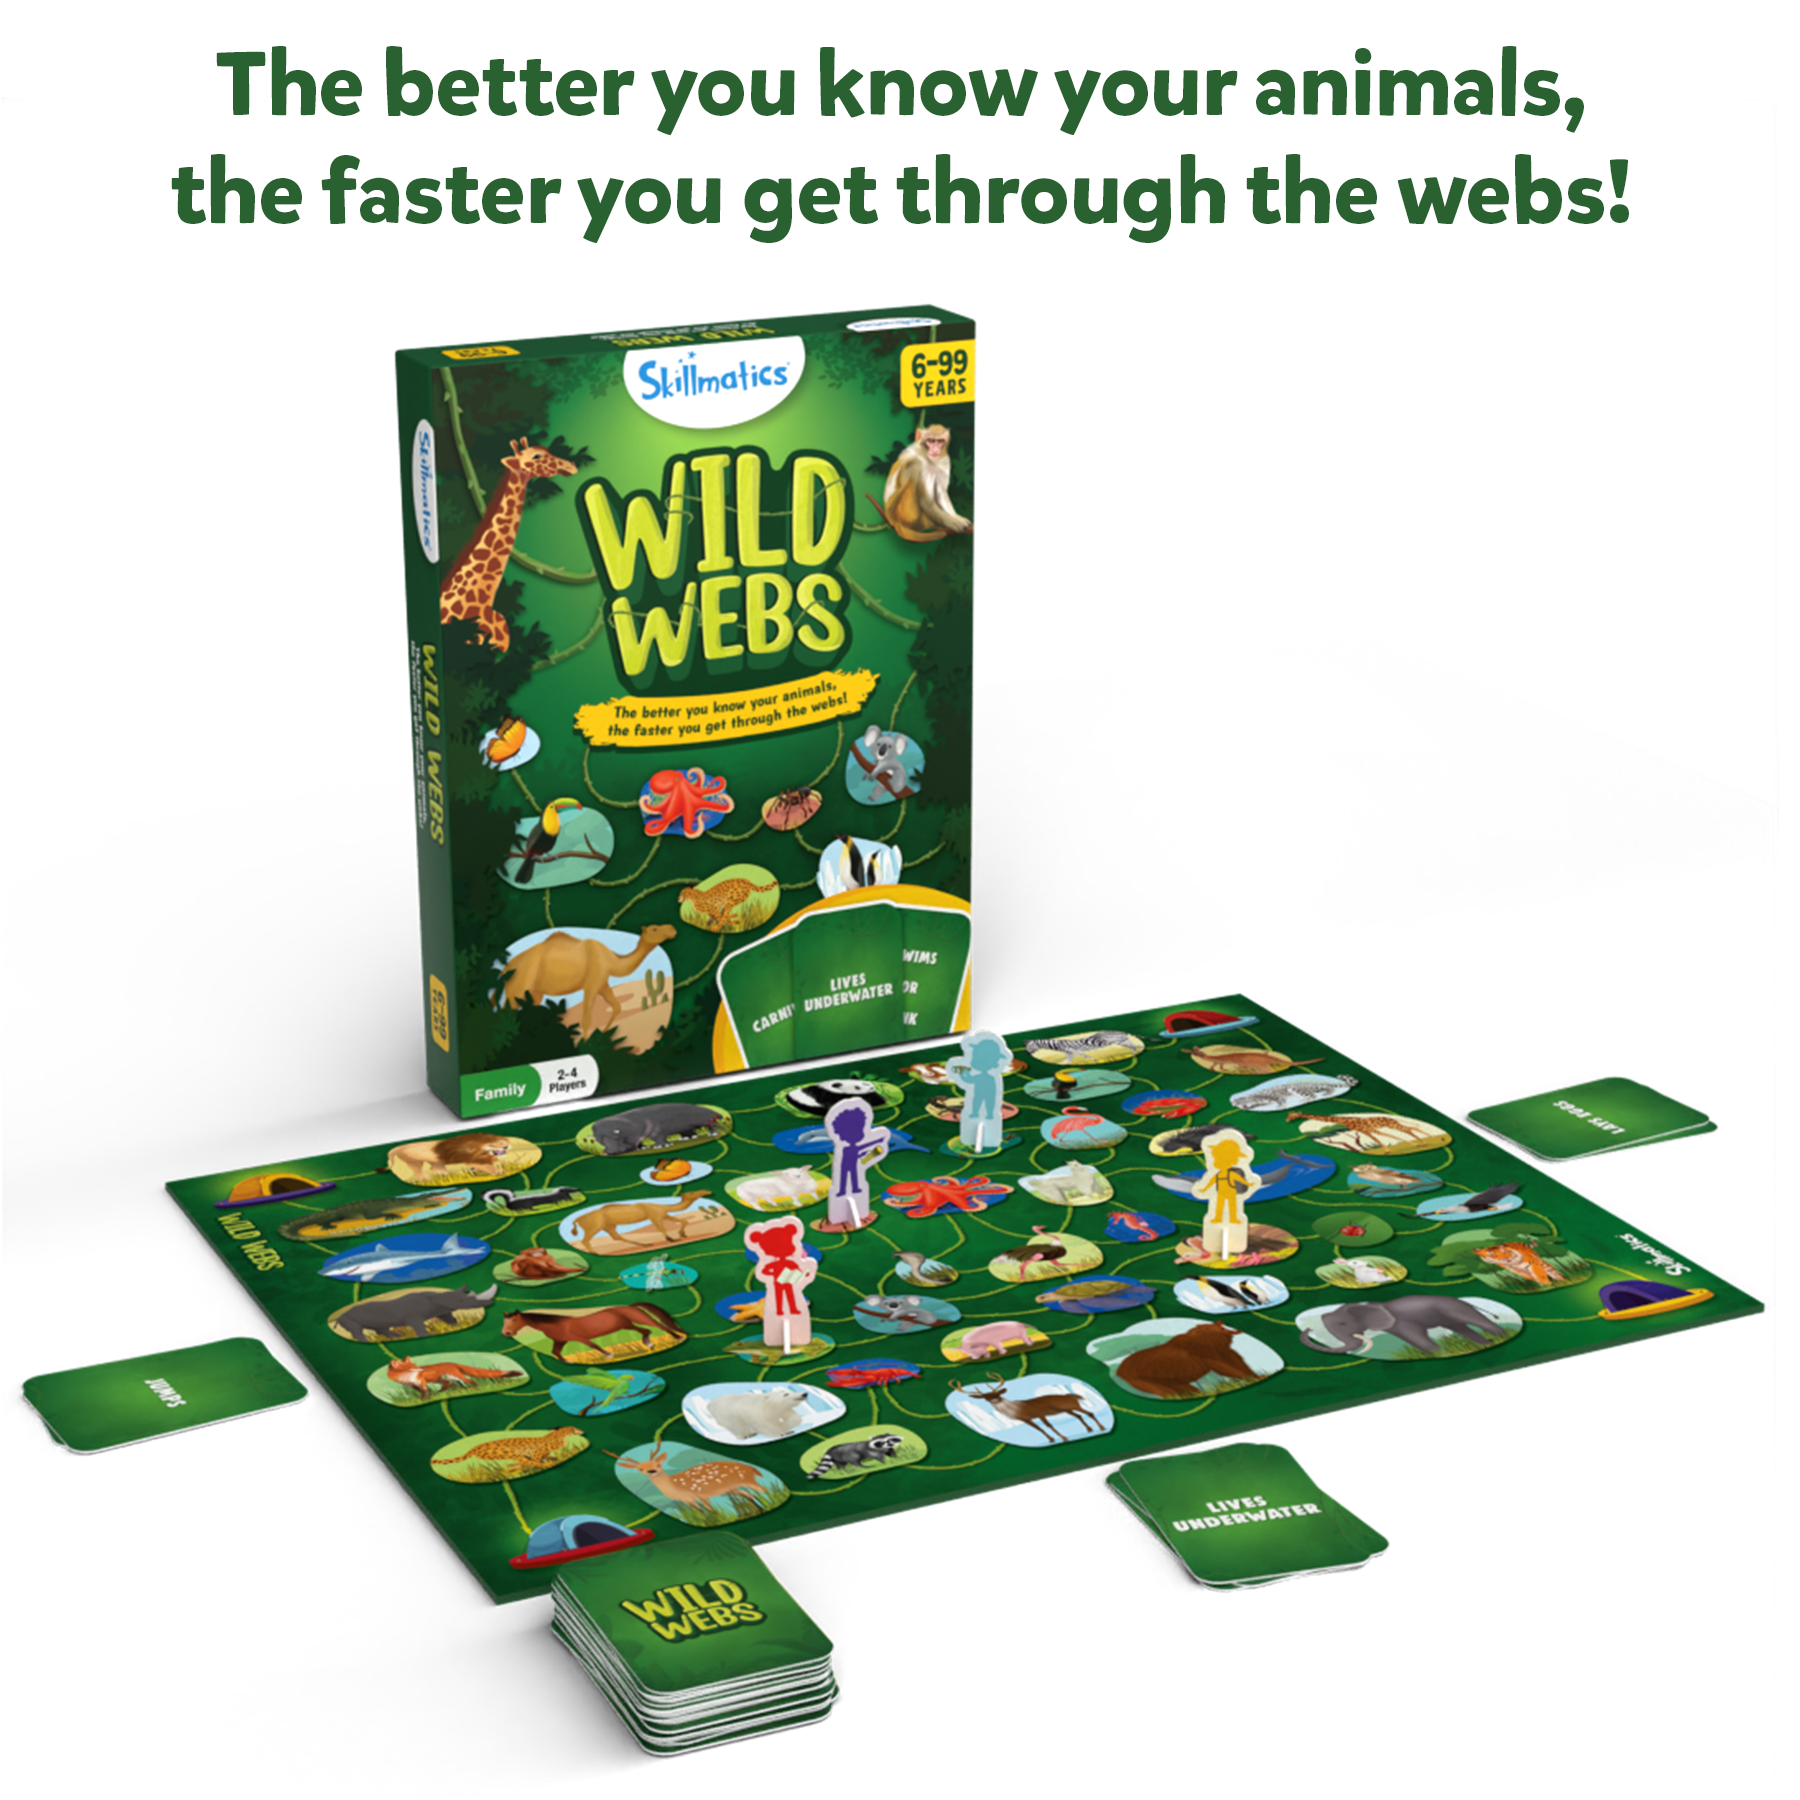 Skillmatics Ultimate Animal Game Box - 3 Games in 1, Family Friendly Games for Ages 6 and Up